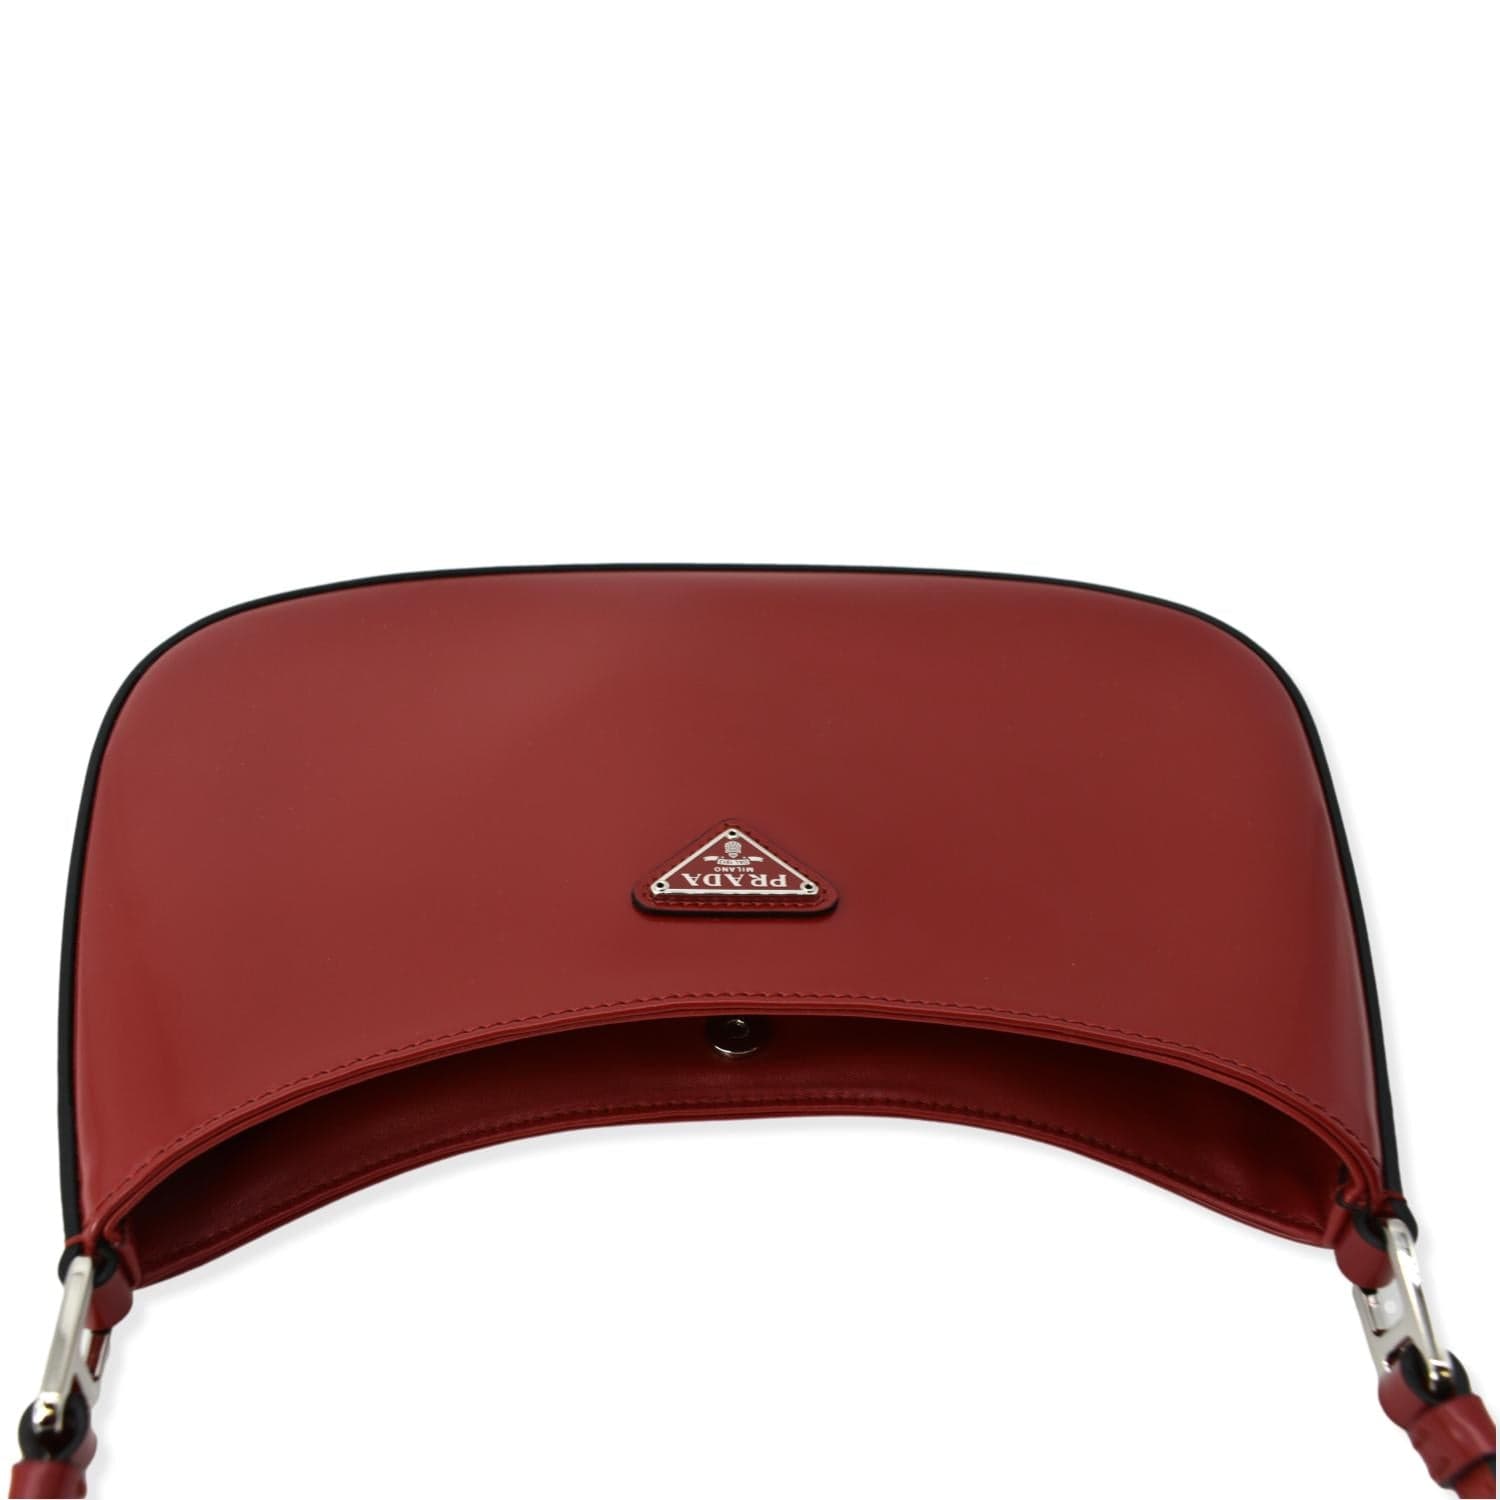 Cleo Small Leather Shoulder Bag in Red - Prada